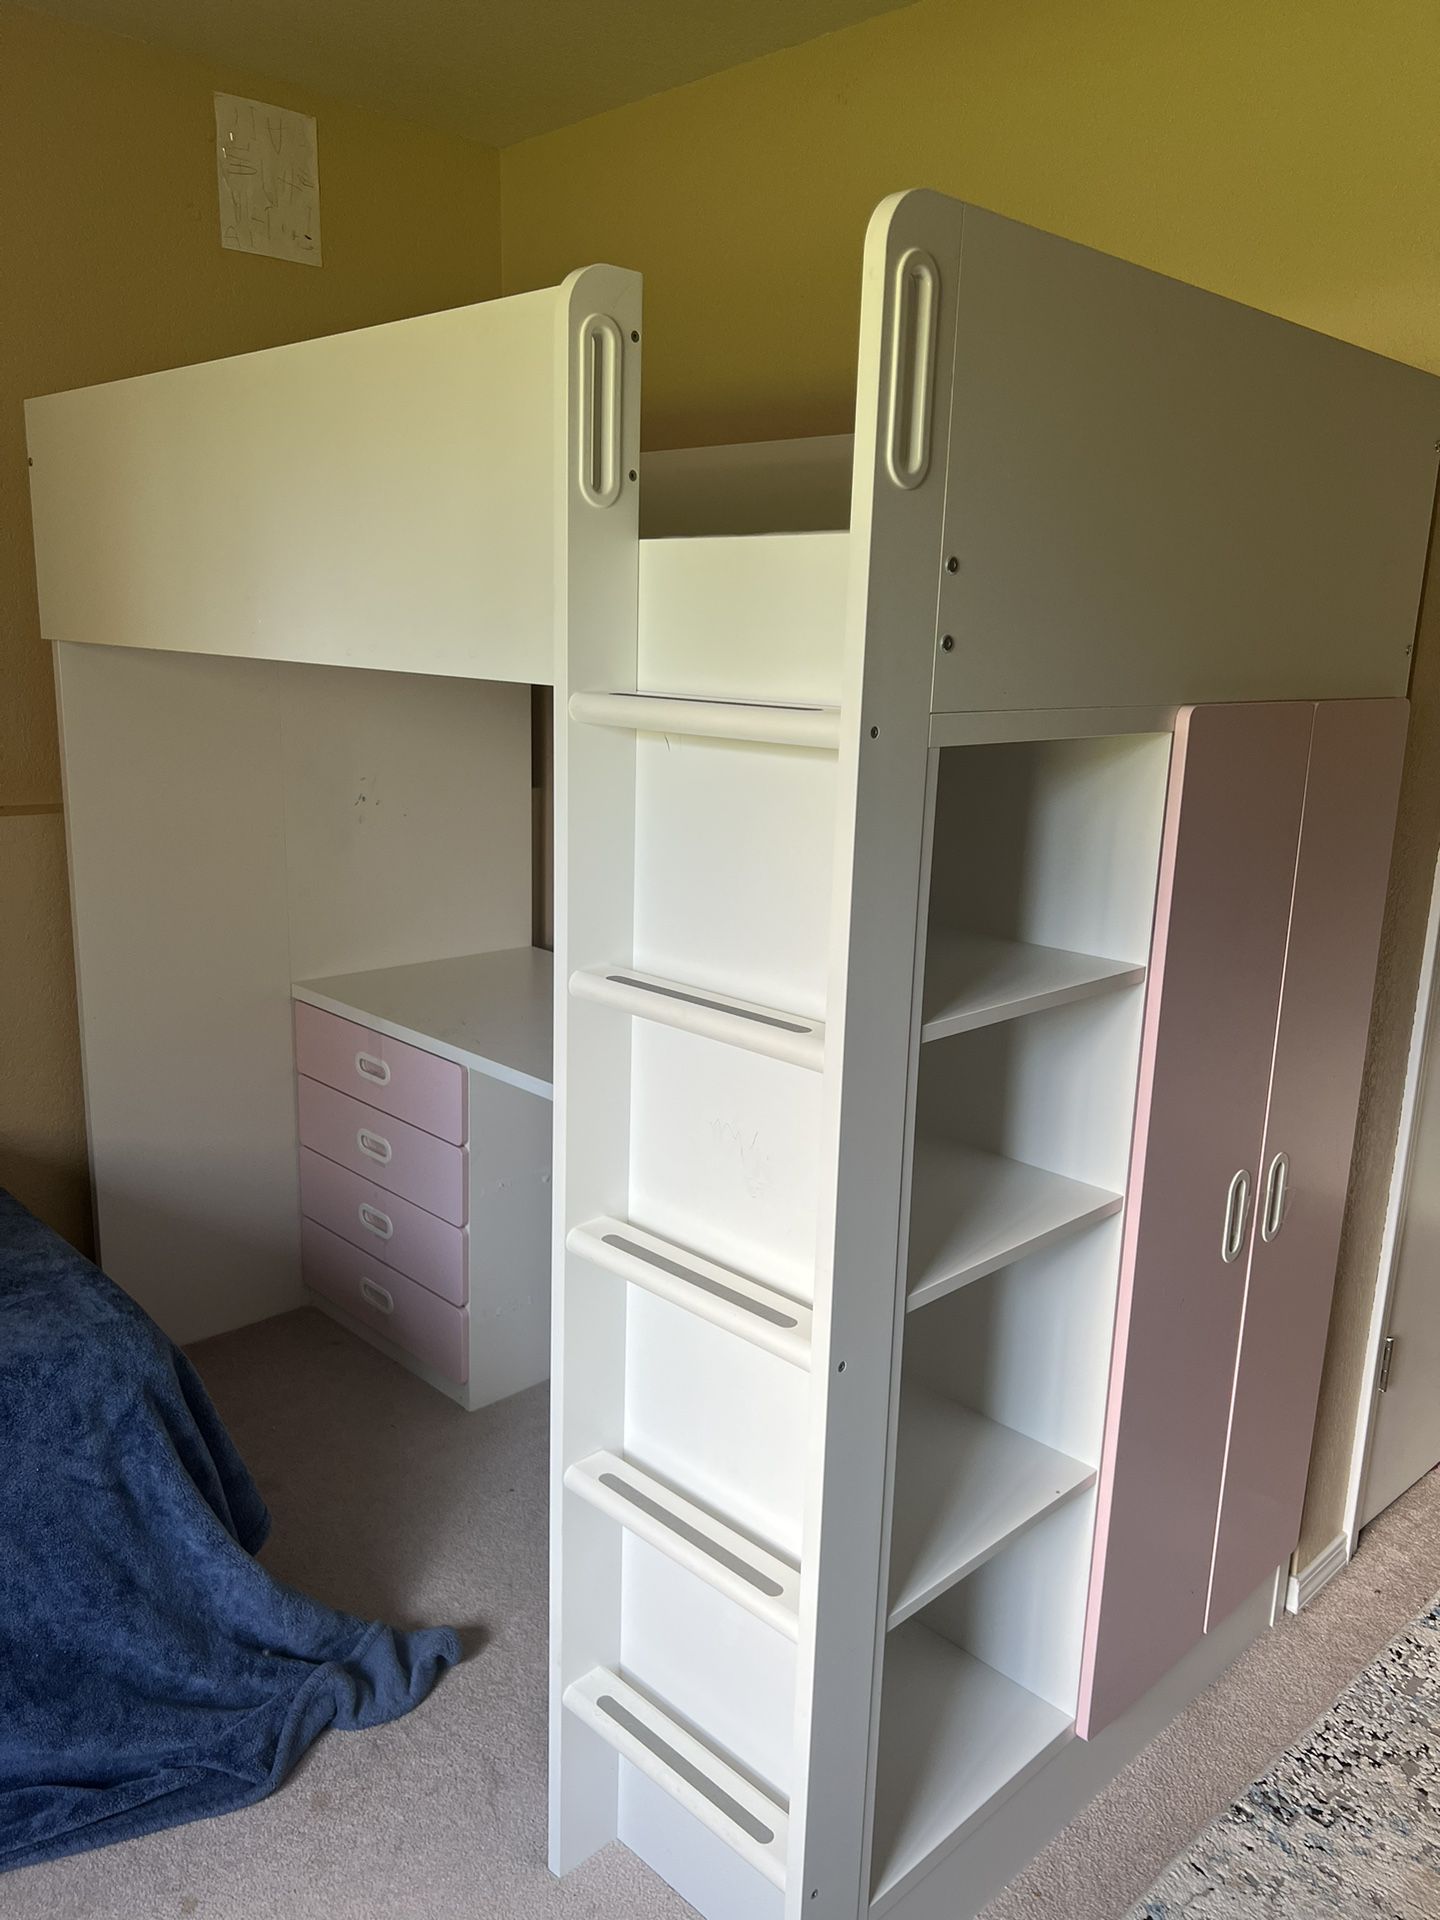 Girl's Bunkbed, Workspace, Shelves and Armoire (All-in-One)